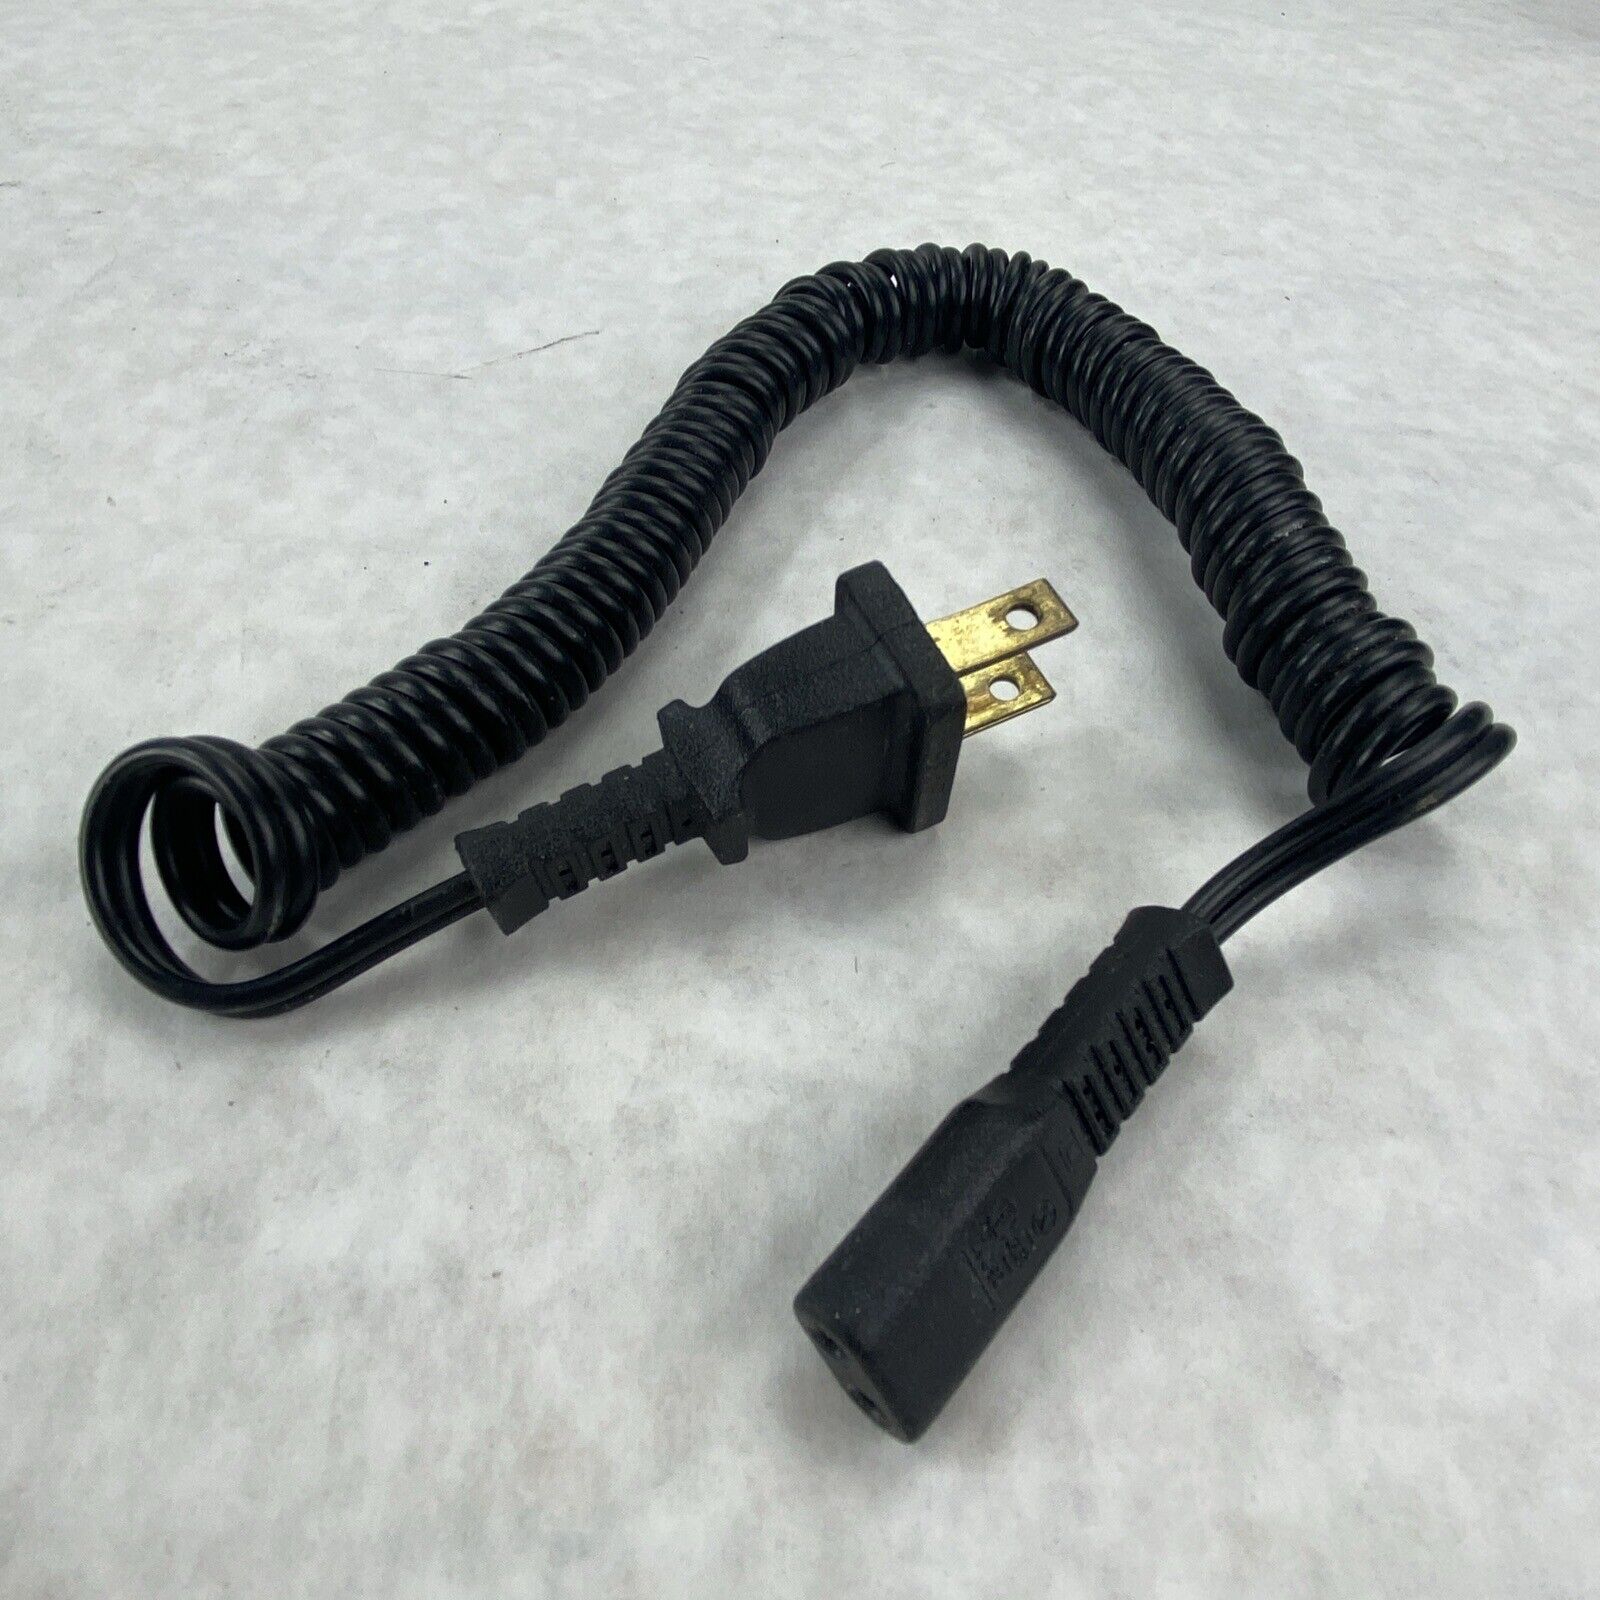 Replacement Charge Adapter Power Cord ONLY for Select Braun Shavers